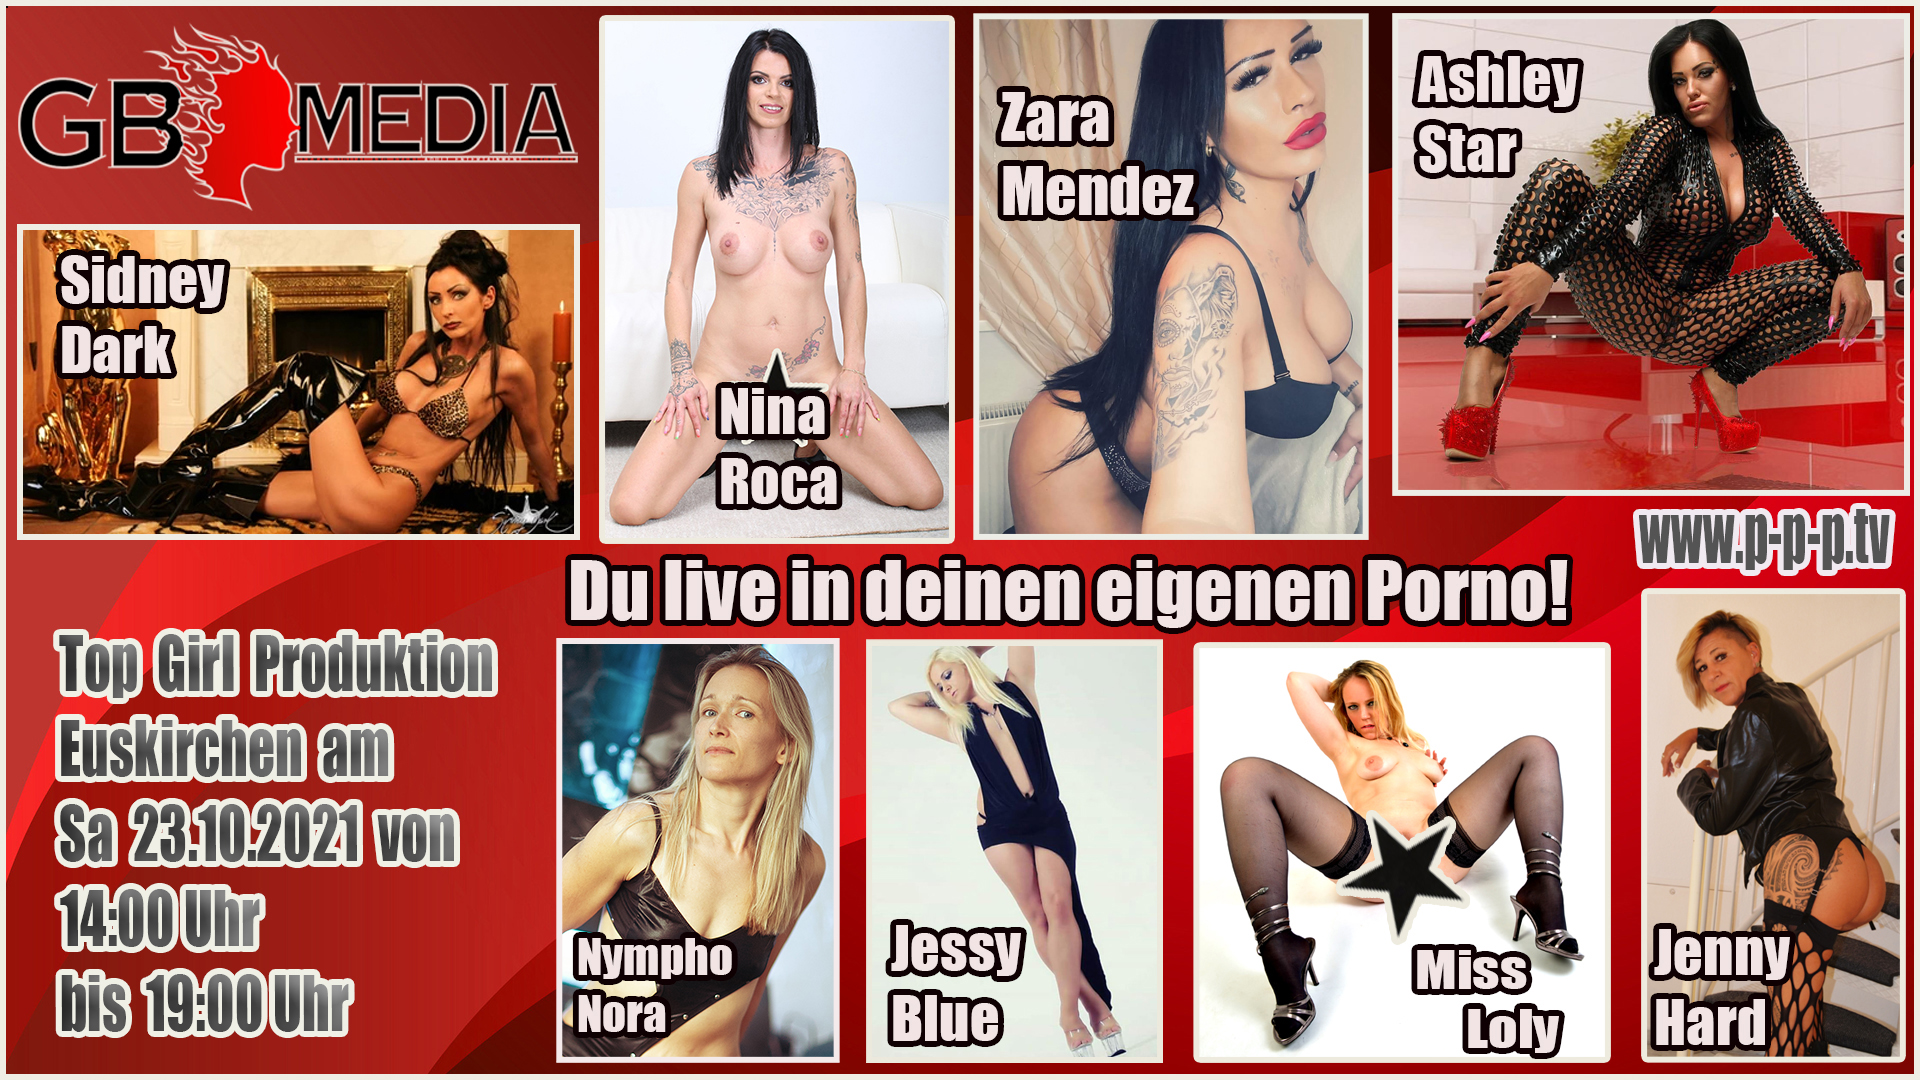 Top Girl Produktion am 23.10. in Euskirchen thumb image